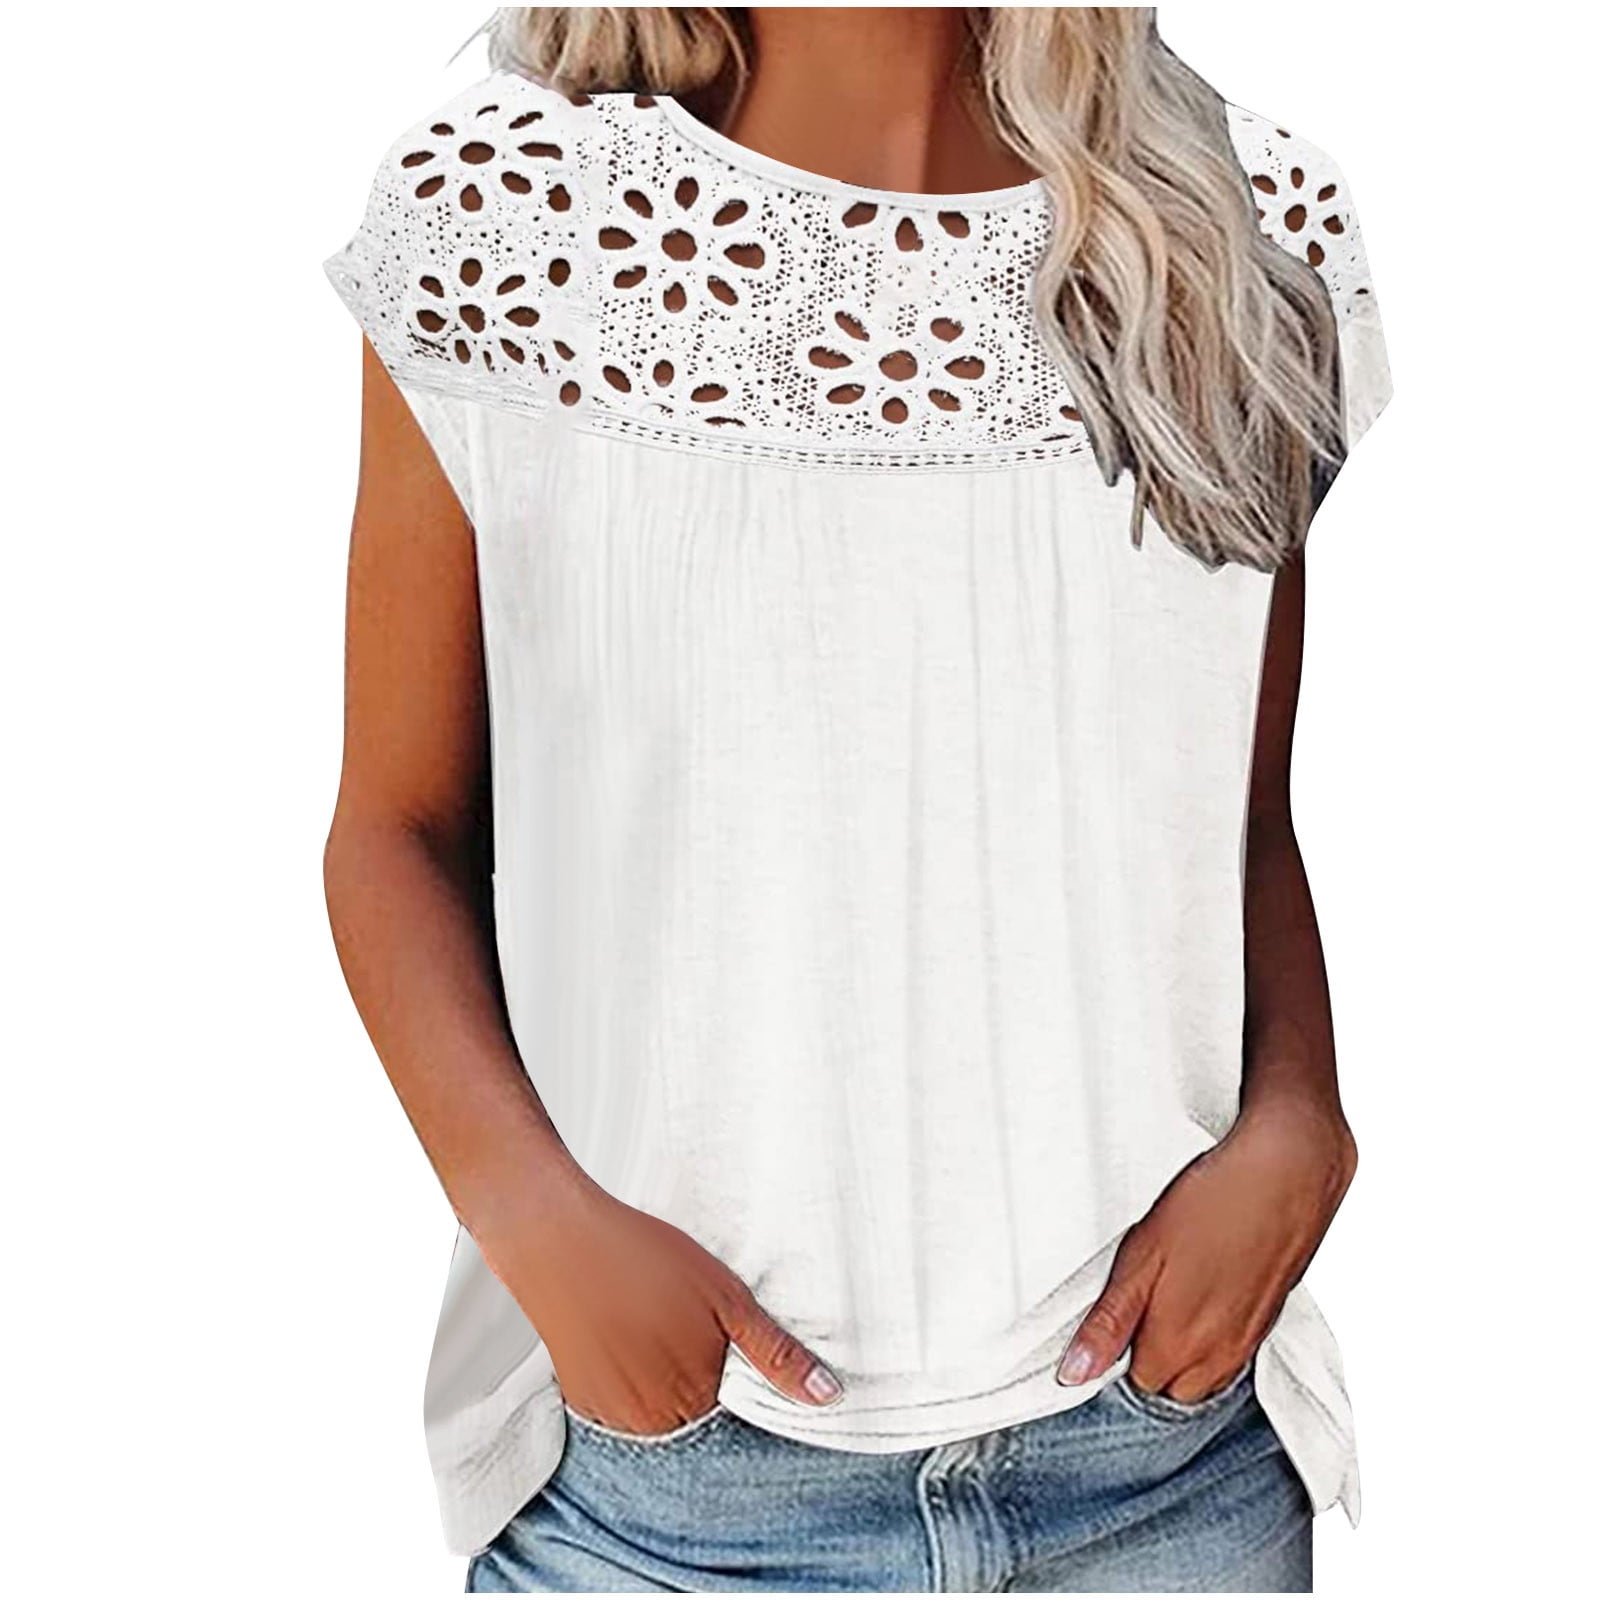 YYDGH Women's Round Neck Batwing Short Sleeve T Shirt Eyelet Embroidery ...